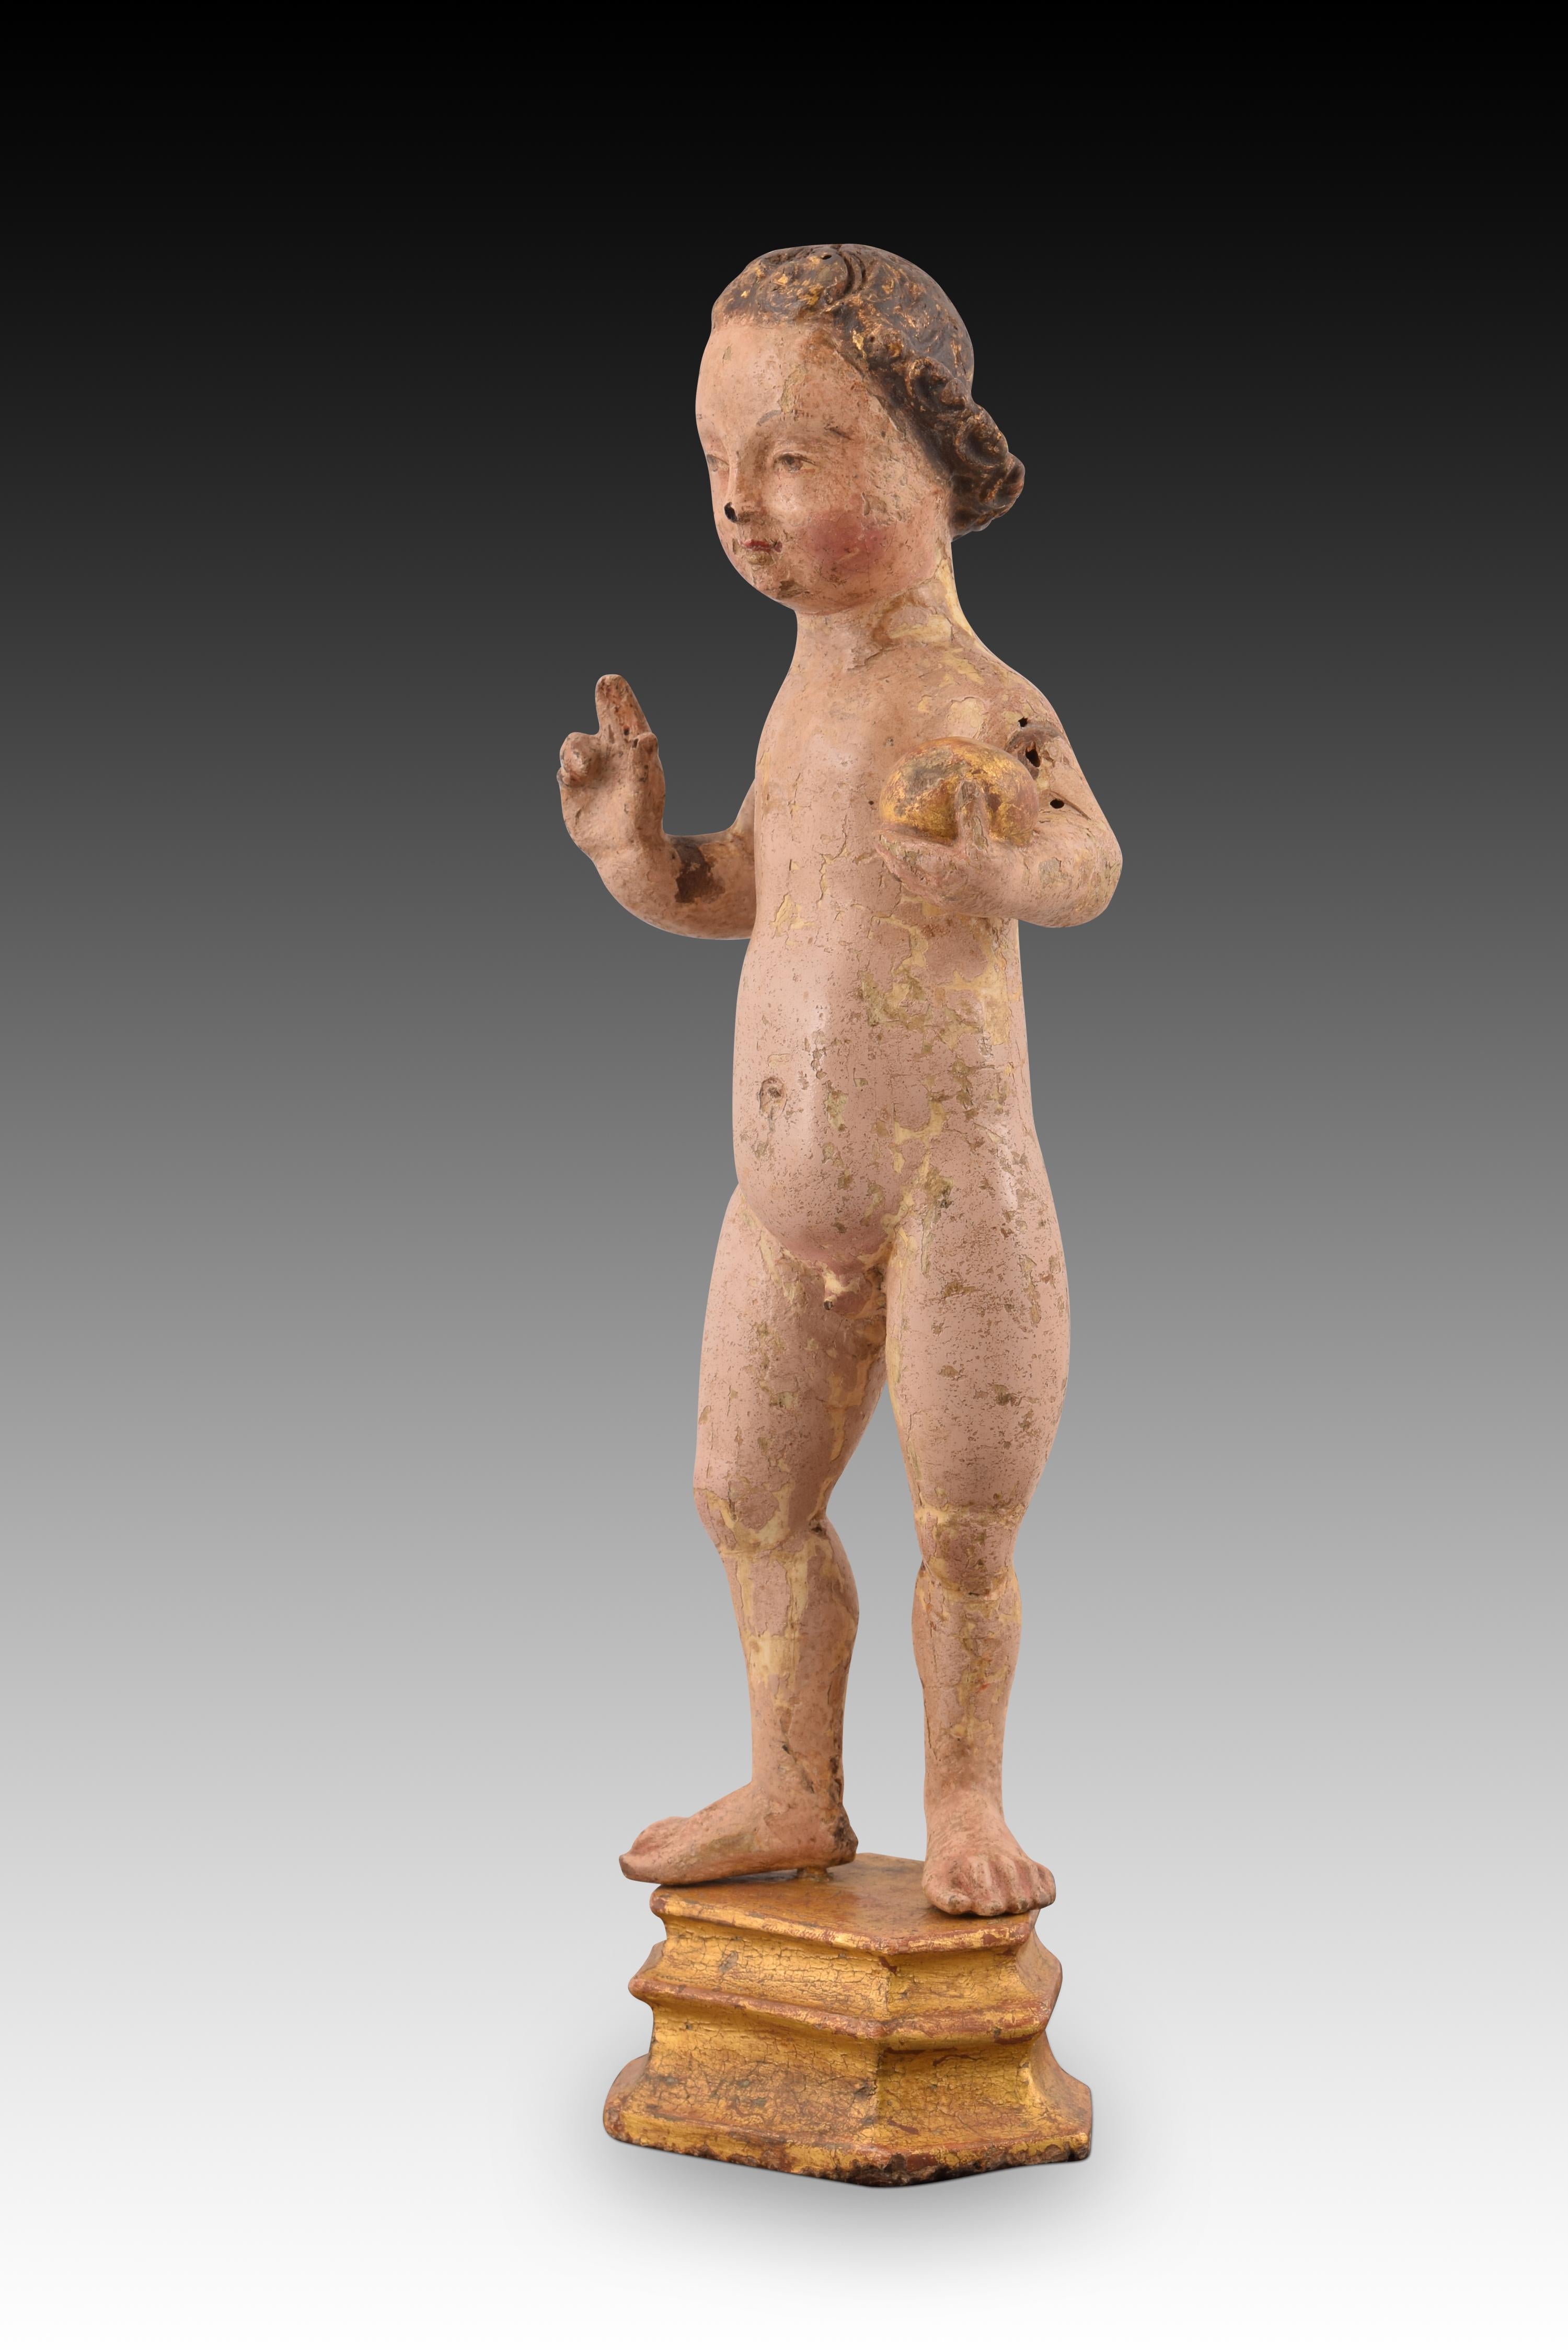 Child Jesus. Carved and polychrome wood. Flemish school, towards the first half of the 16th century. 
Baby Jesus with polygonal base made of carved and polychrome wood. The figure is presented naked, standing, with the right hand raised in a gesture